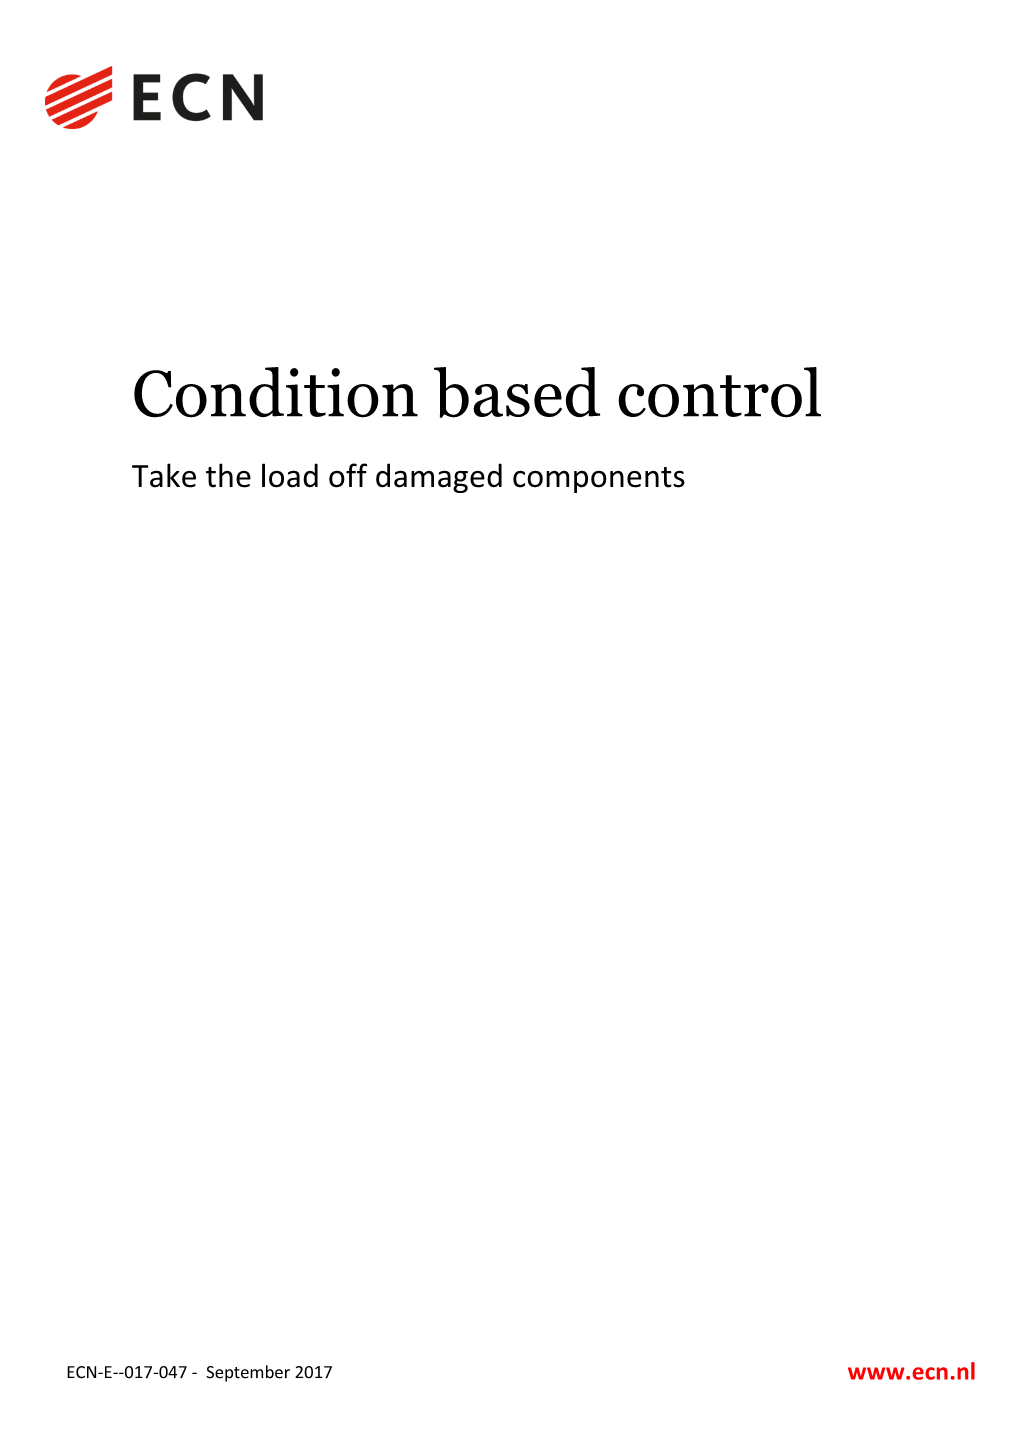 Condition Based Control